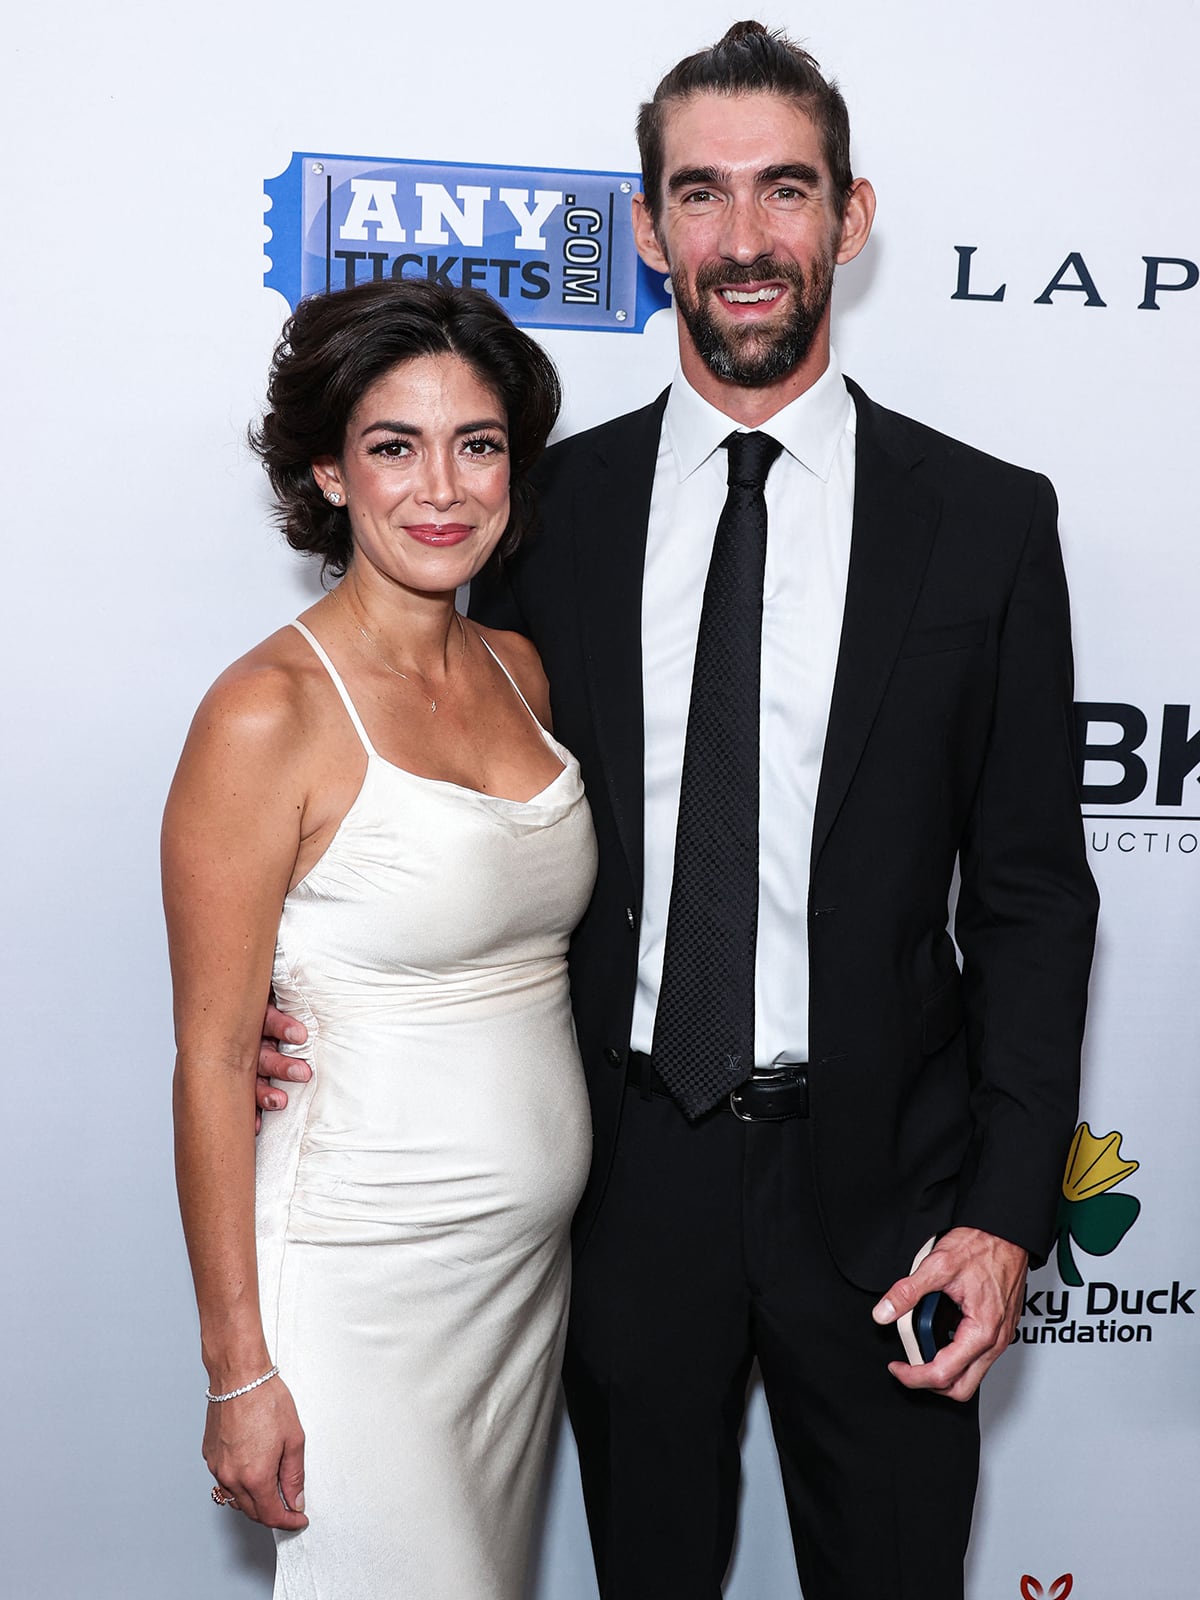 Beauty queen Nicole Johnson and competitive swimmer Michael Phelps at the 23rd Annual Harold & Carole Pump Foundation Gala in Los Angels on August 19, 2023